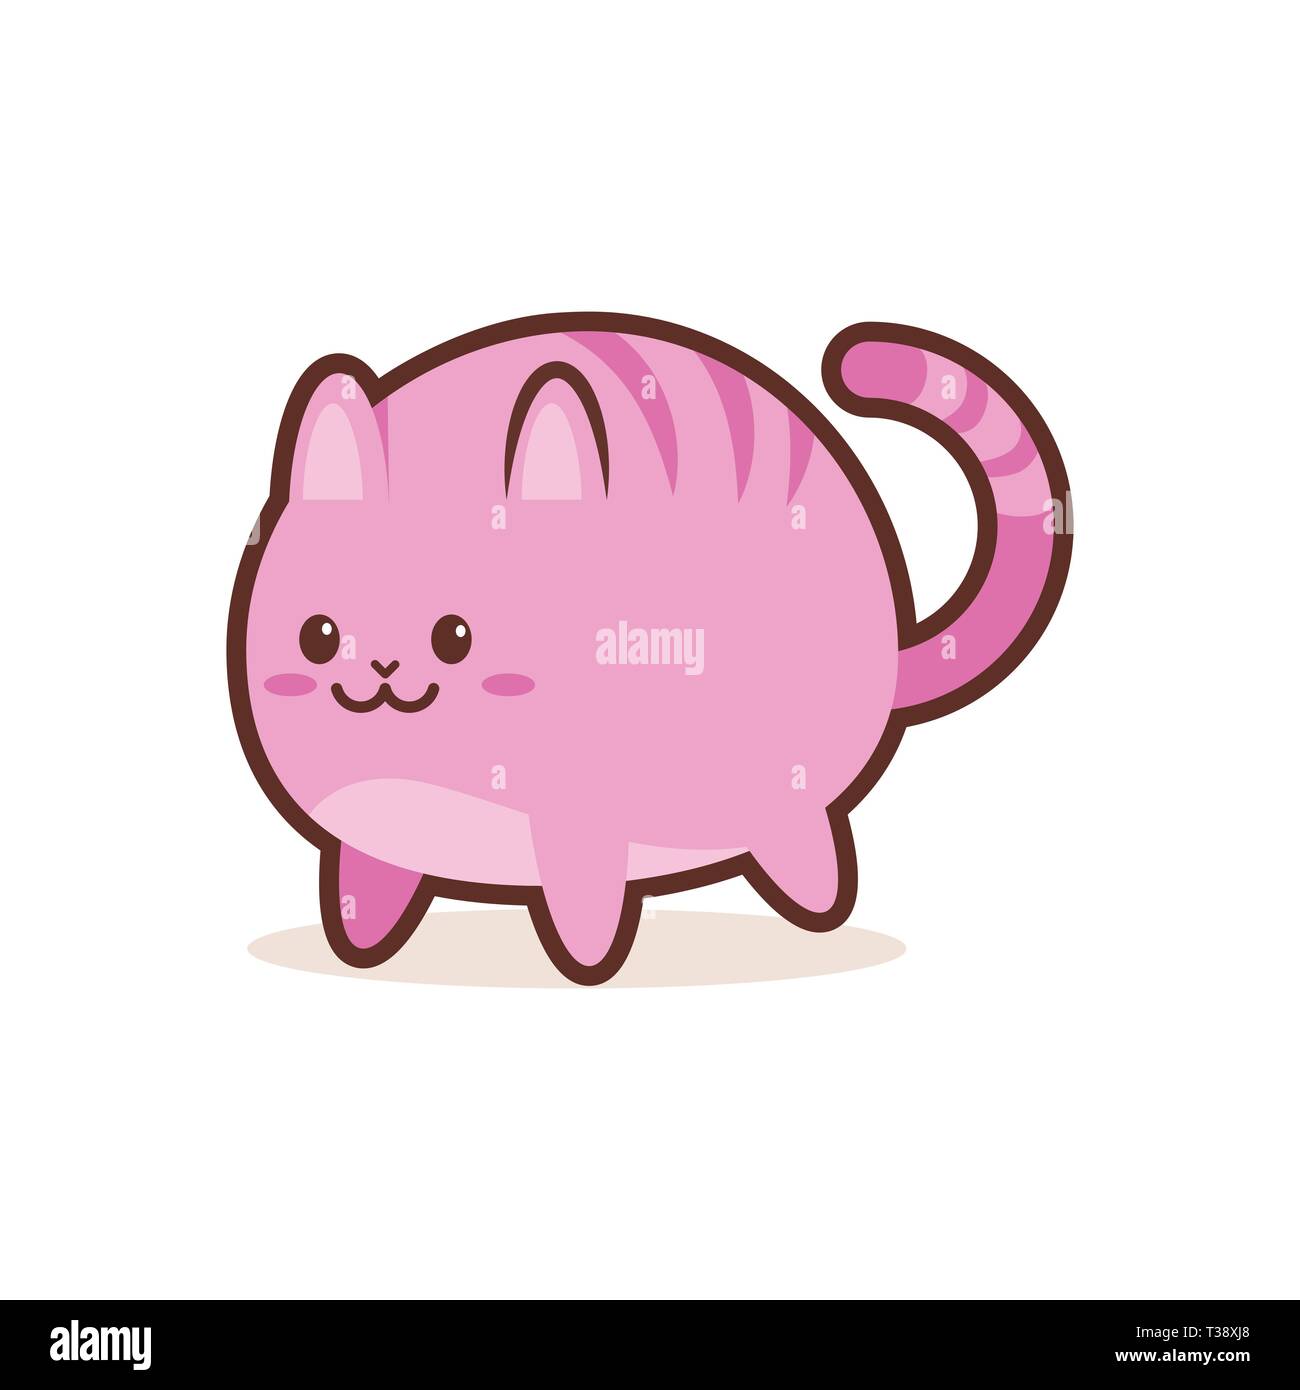 cute pink cat cartoon comic character with smiling face happy emoji anime kawaii style funny animal concept vector illustration Stock Vector